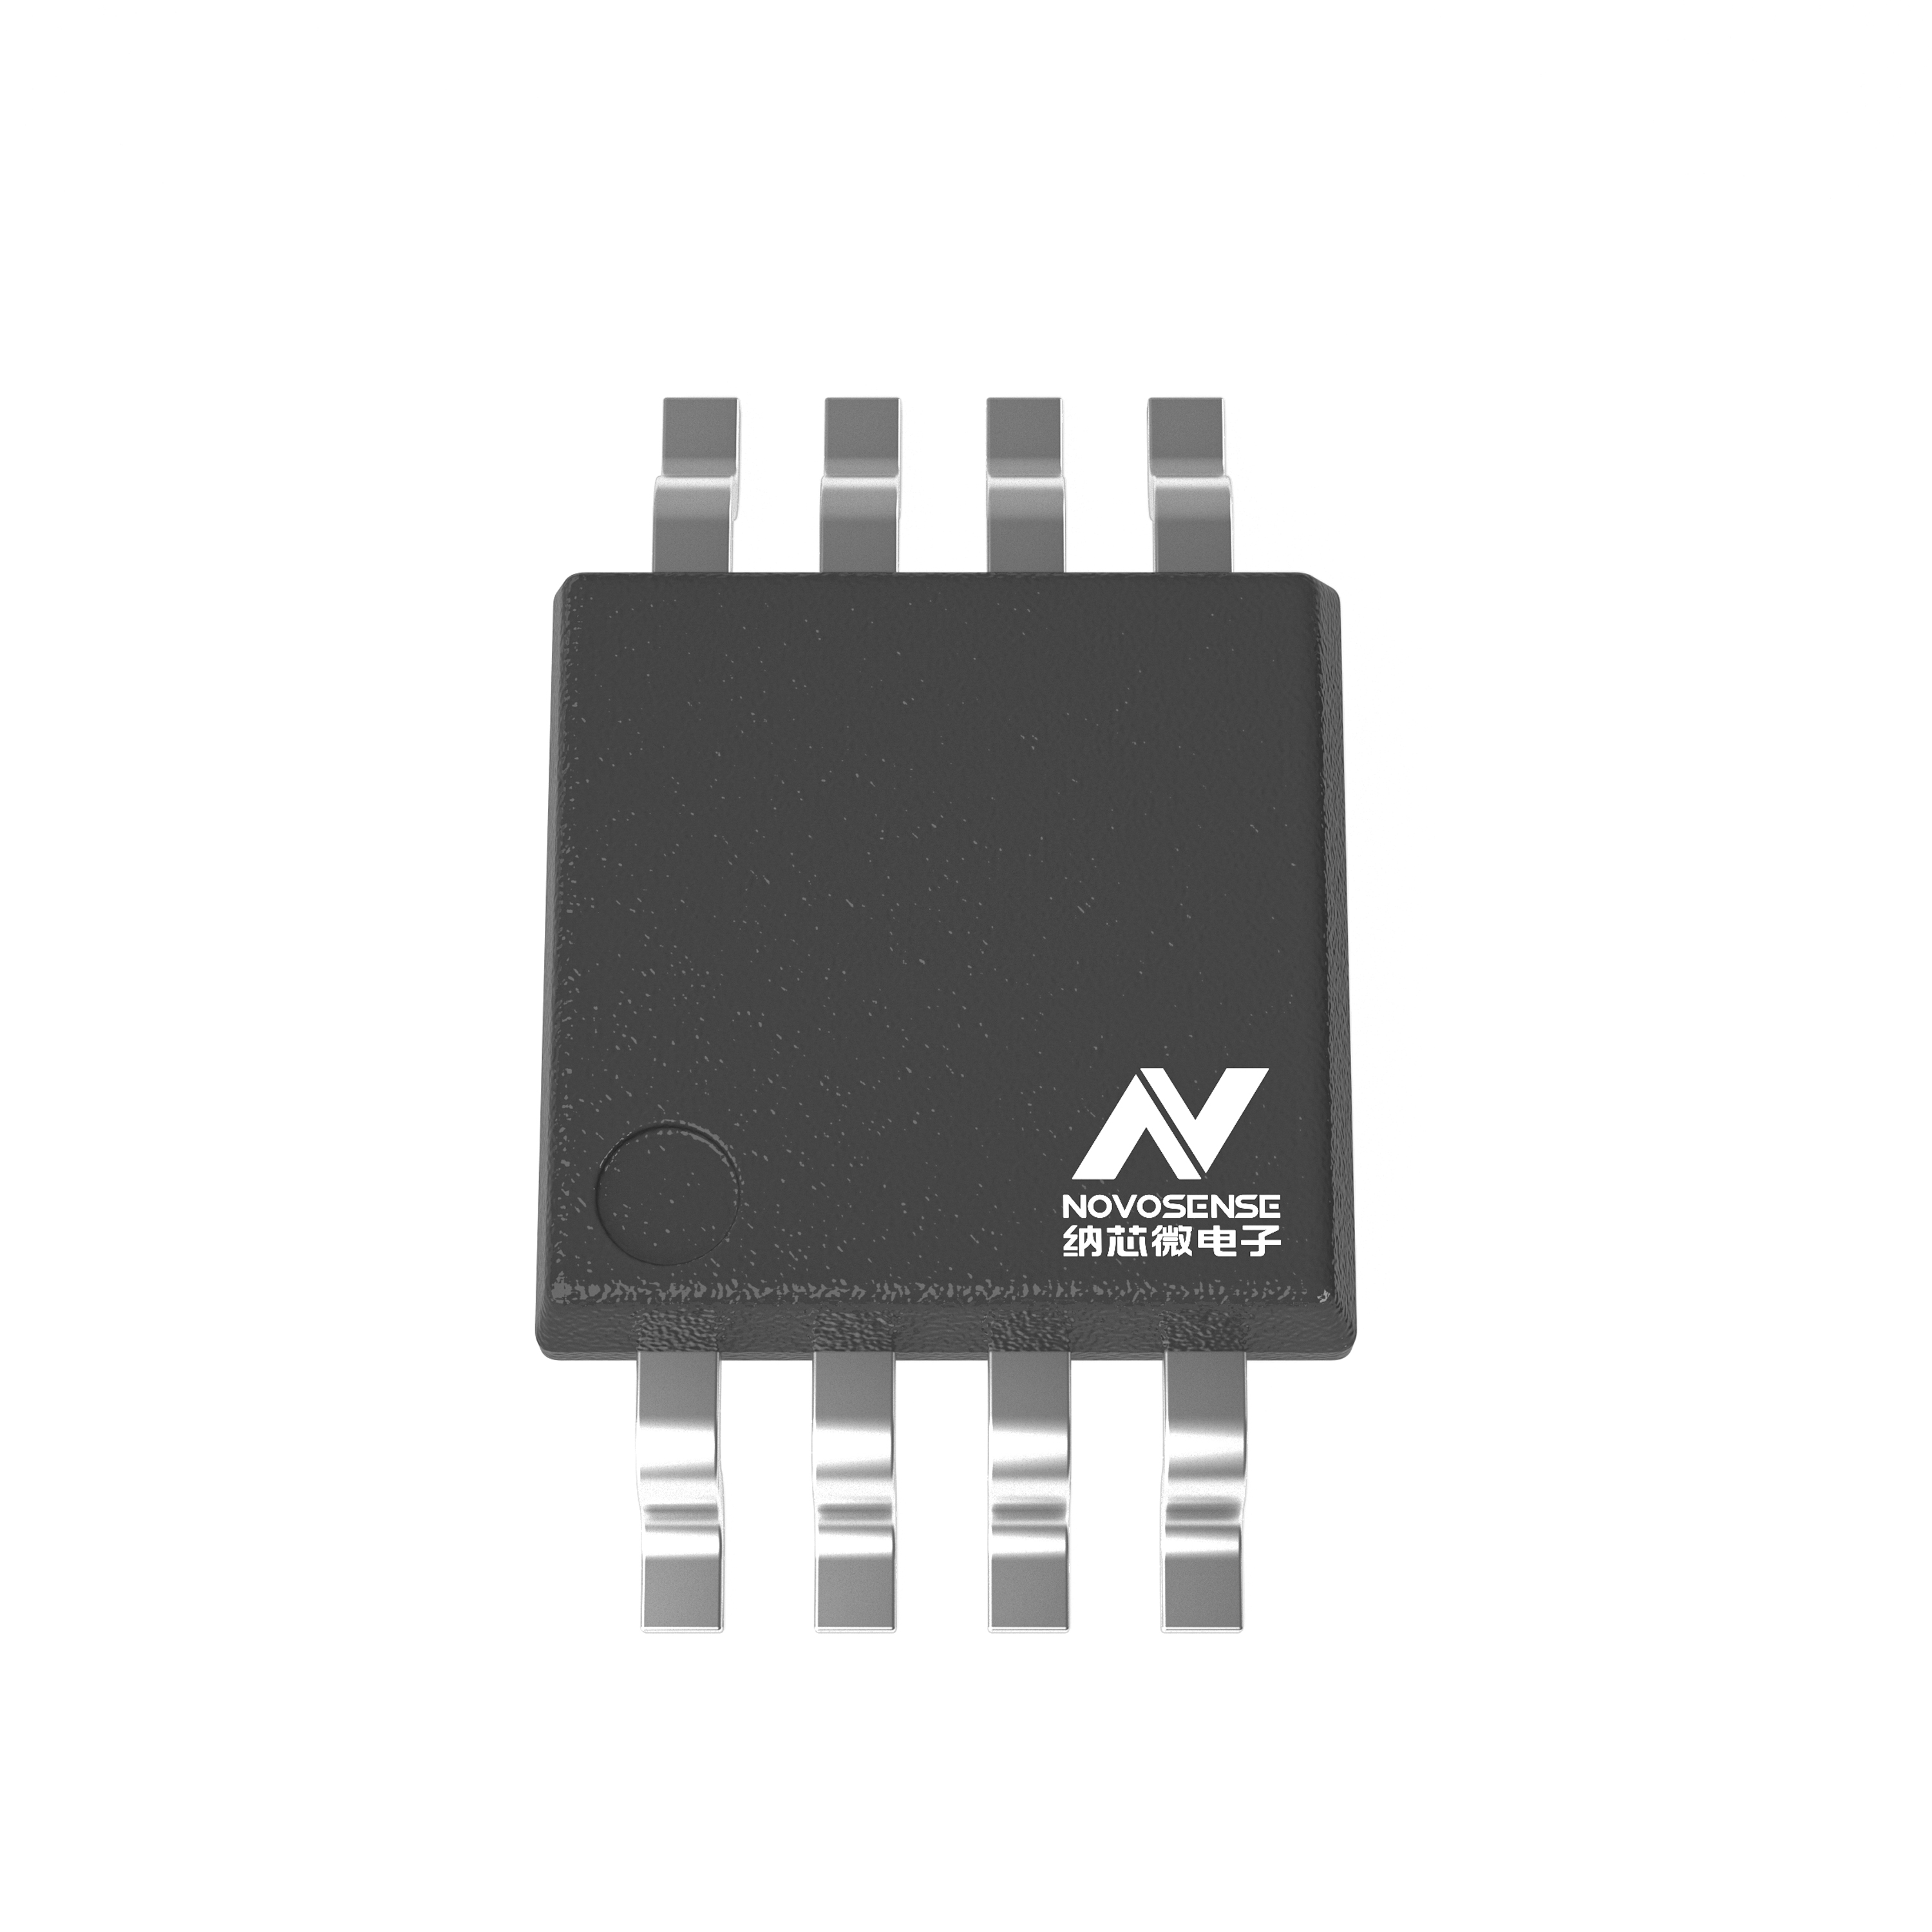 【NCA9511-DMSR】HOT SWAPPABLE I2C BUS AND SMBUS